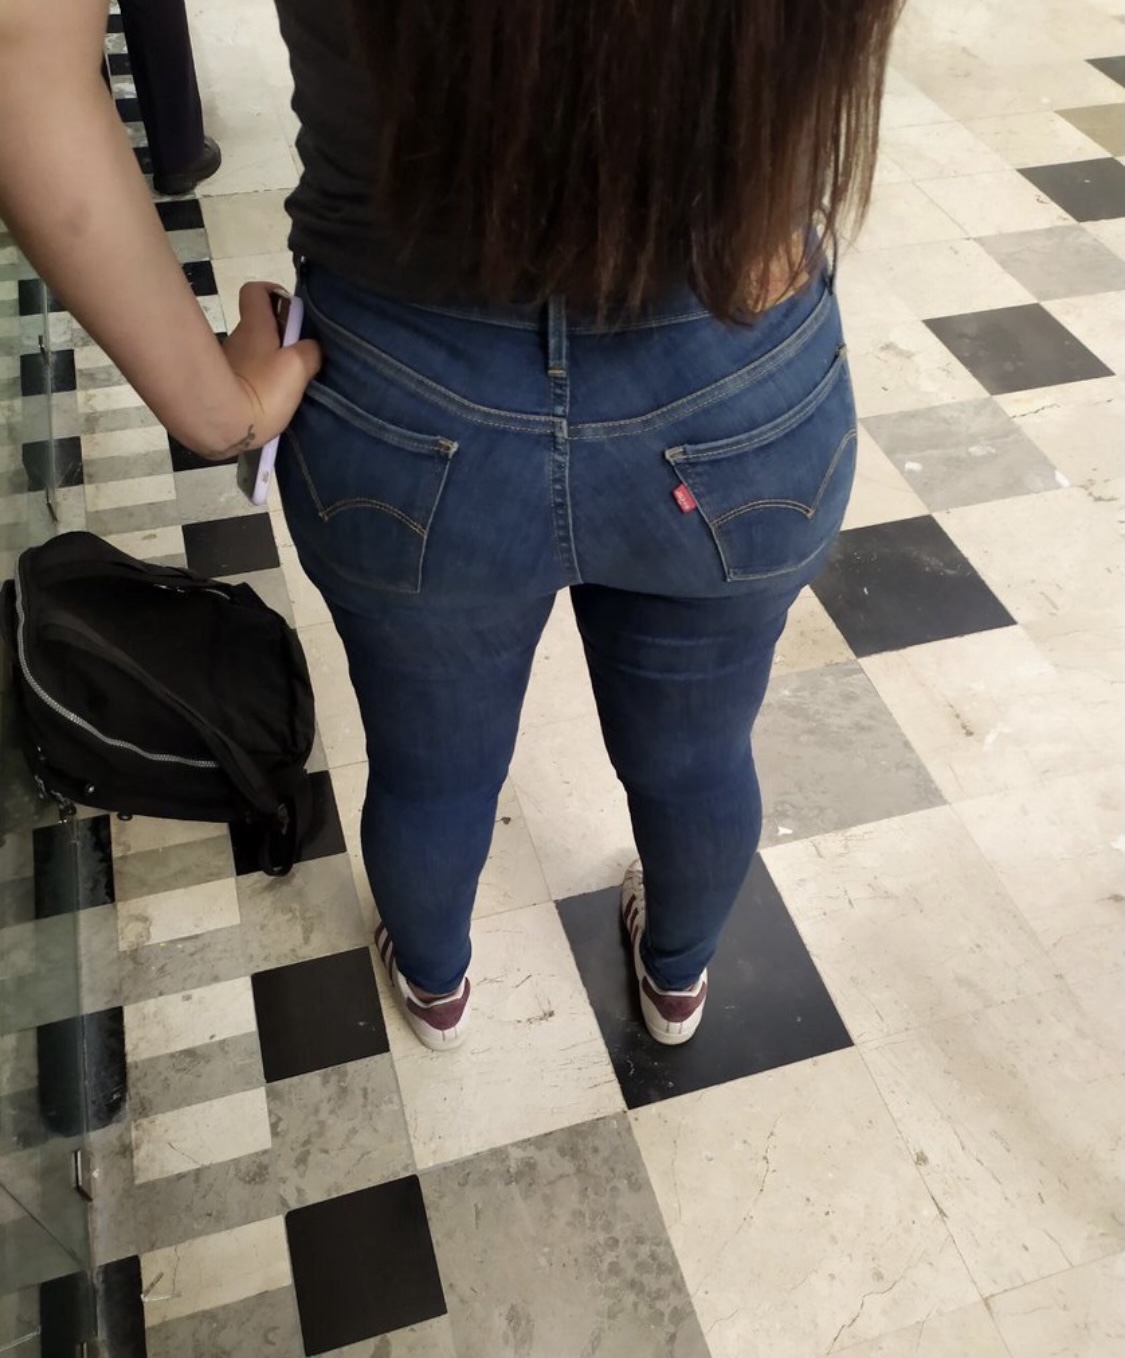 Hot Chick In Jeans